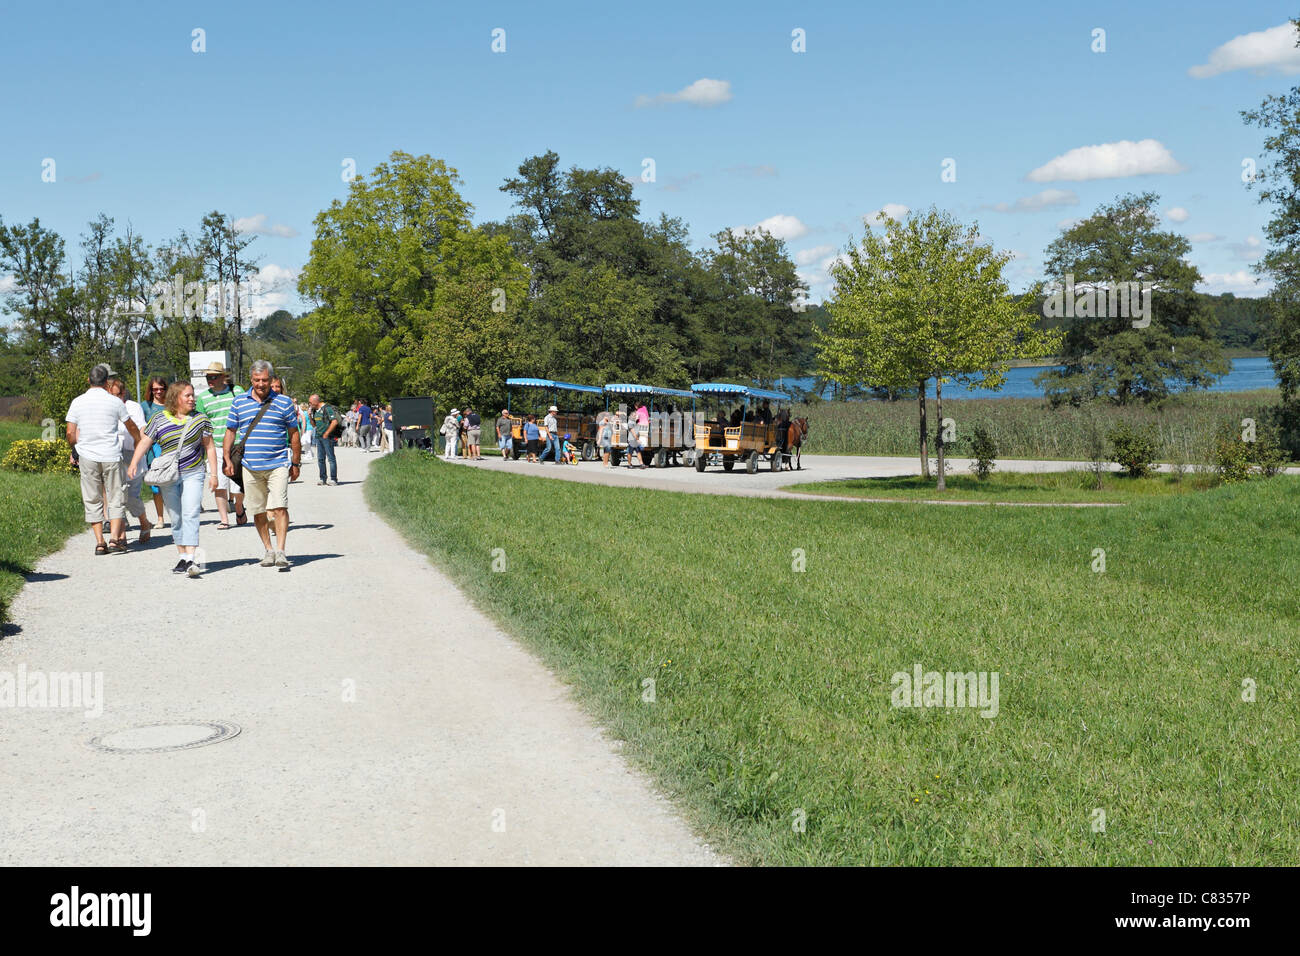 Tourists on a pathway with Horse carriages on the Herreninsel, Chiemgau Upper Bavaria Germany Stock Photo